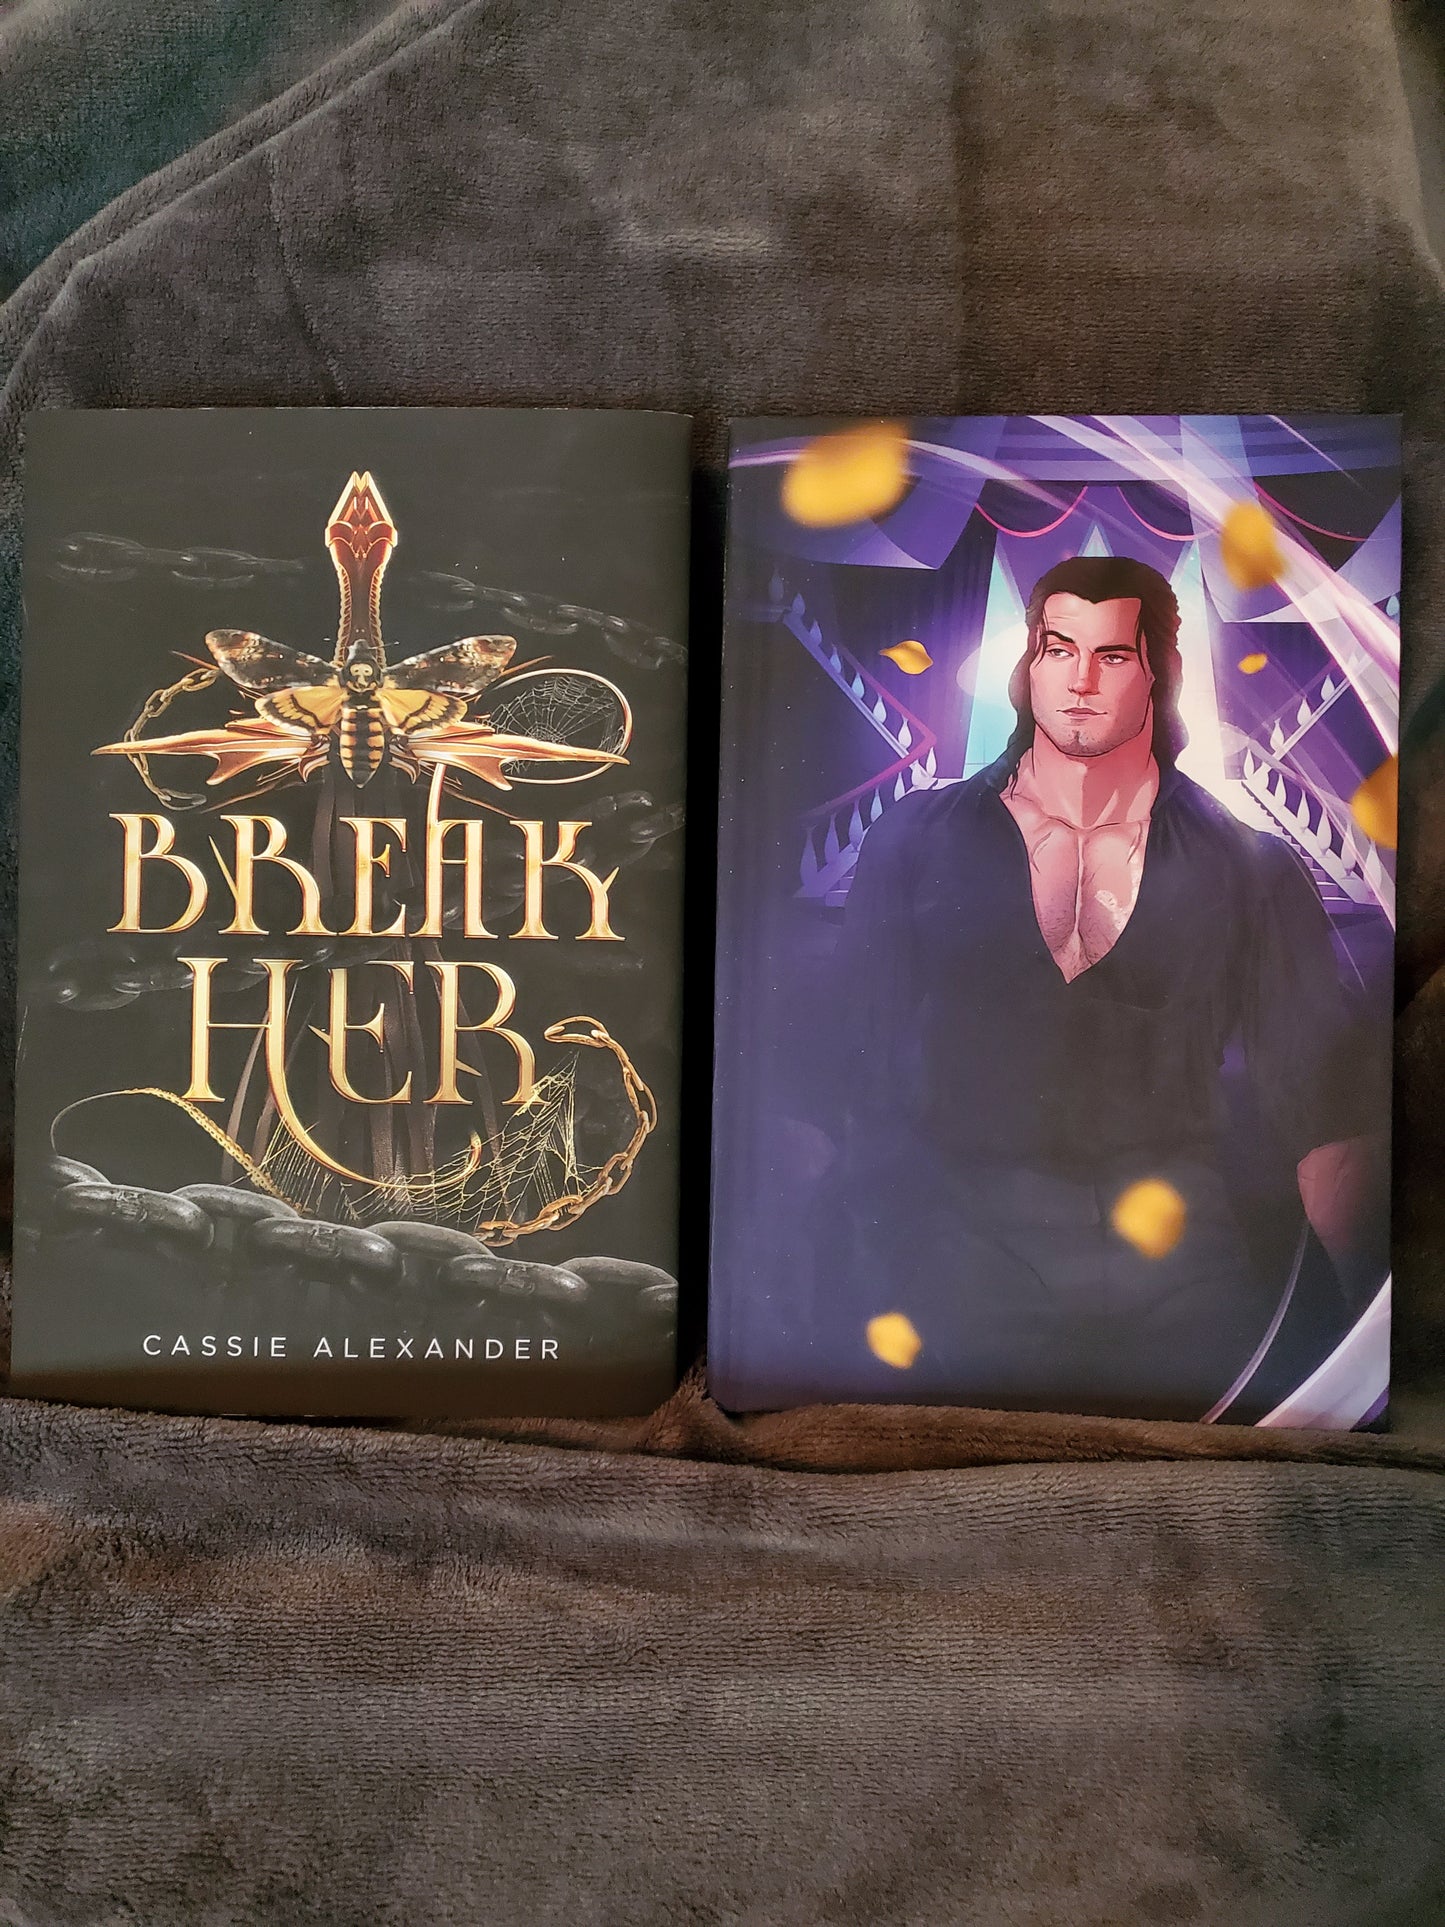 Dust jacket for Break Her by Cassie Alexander next to art of Rhaim on the inner book case cover.